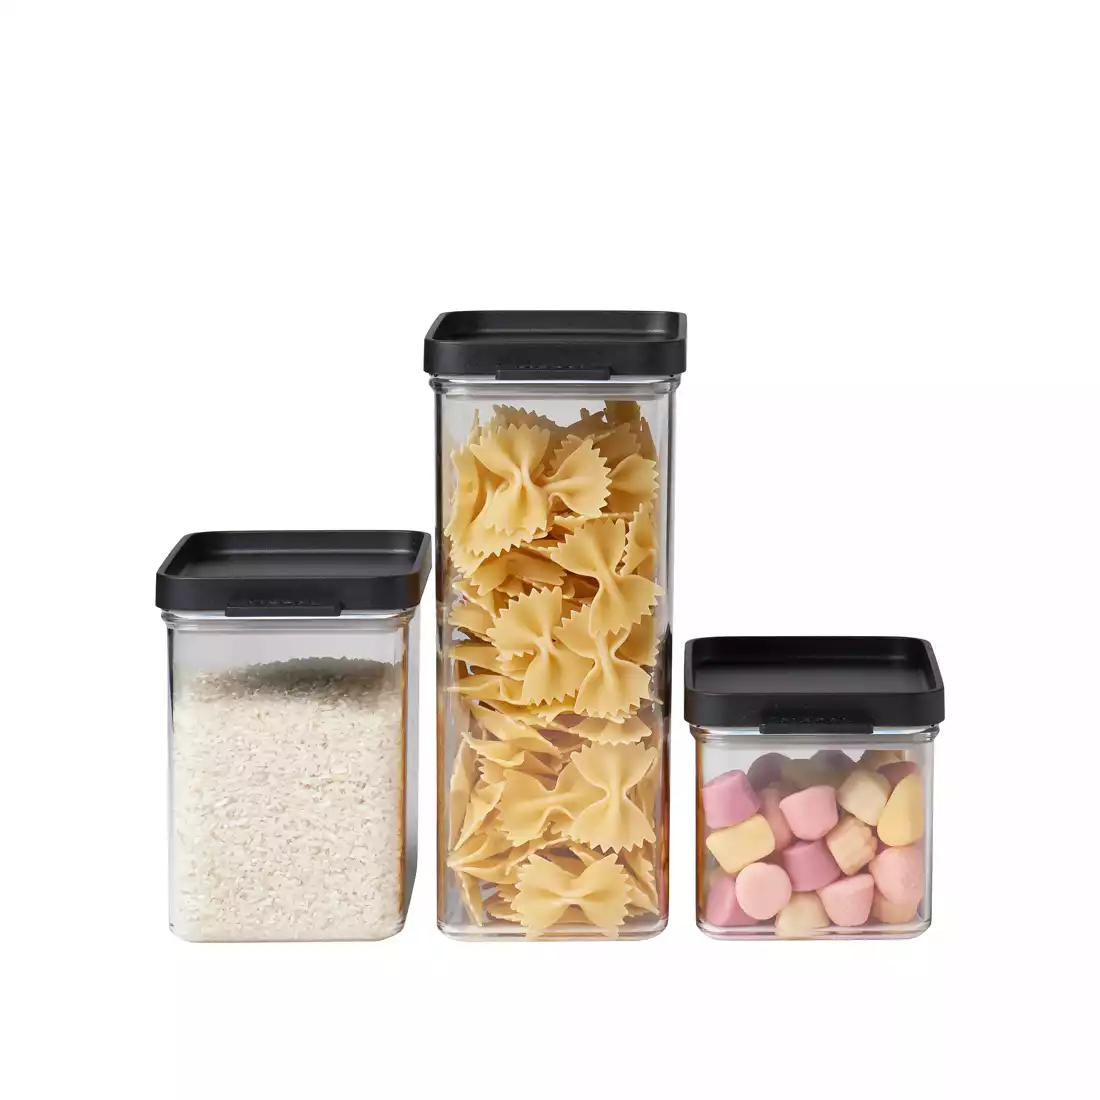 MEPAL OMNIA set of 3 food containers, black